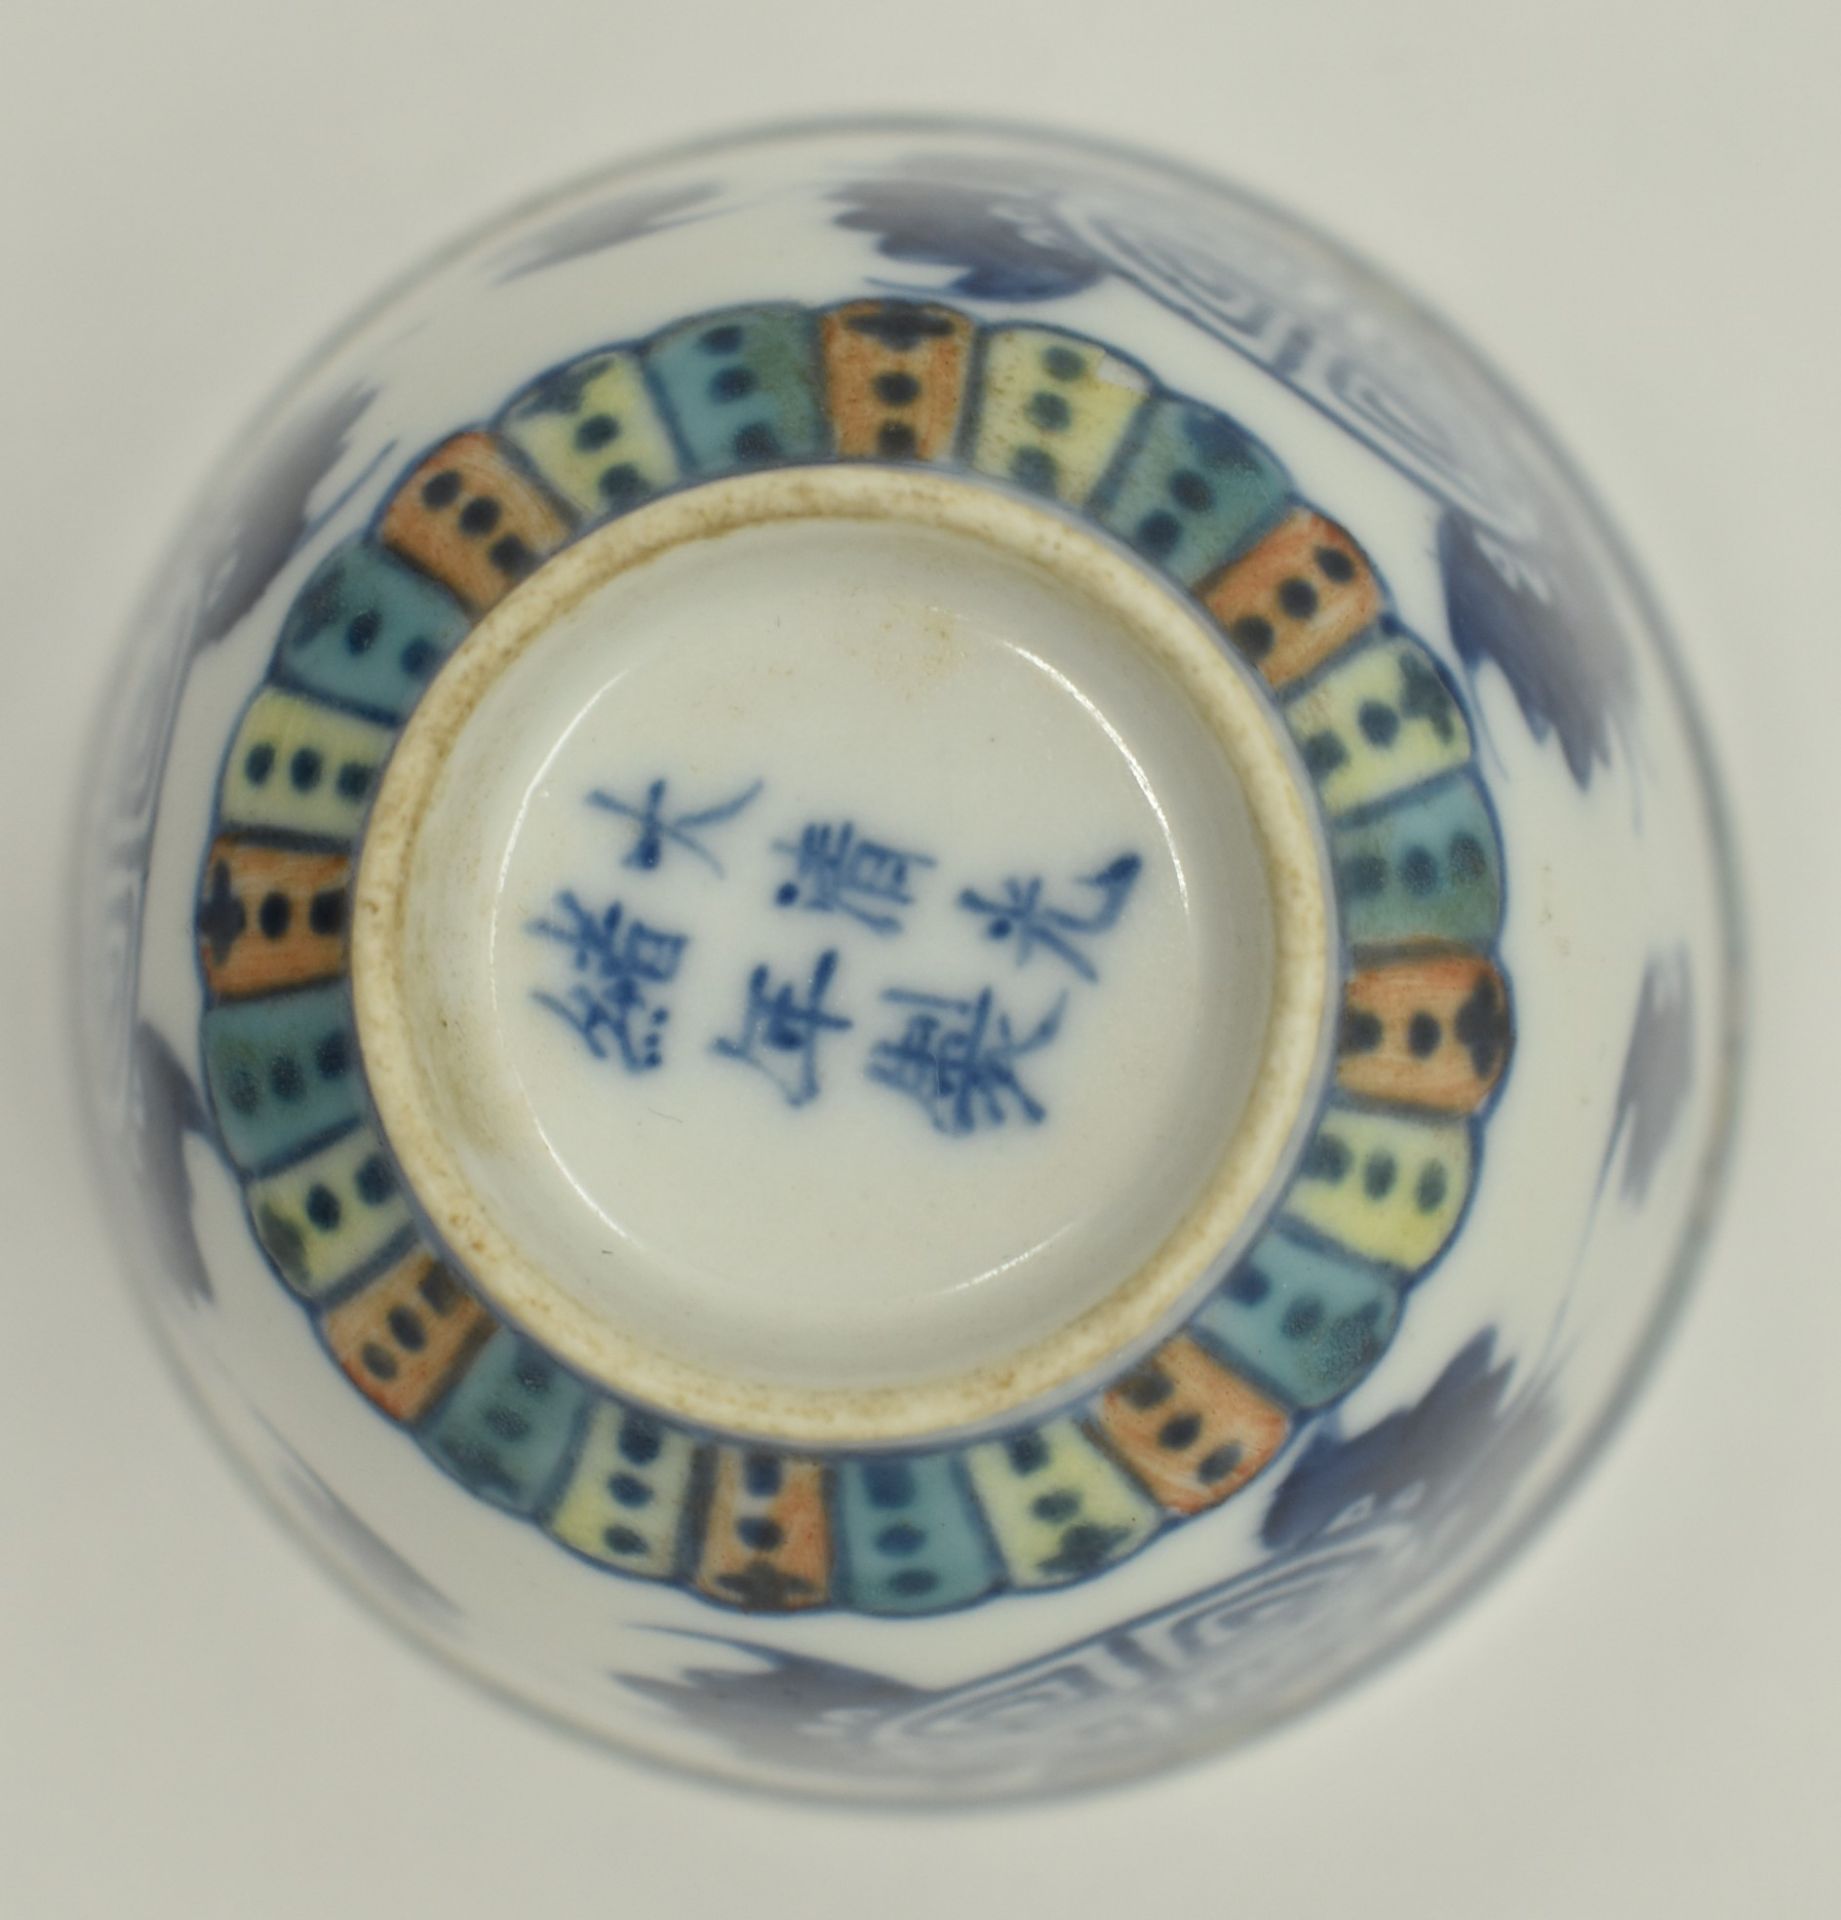 YELLOW & ORANGE ENAMELLED BLUE AND WHITE CUP 光绪青花加彩五福杯 - Image 5 of 9